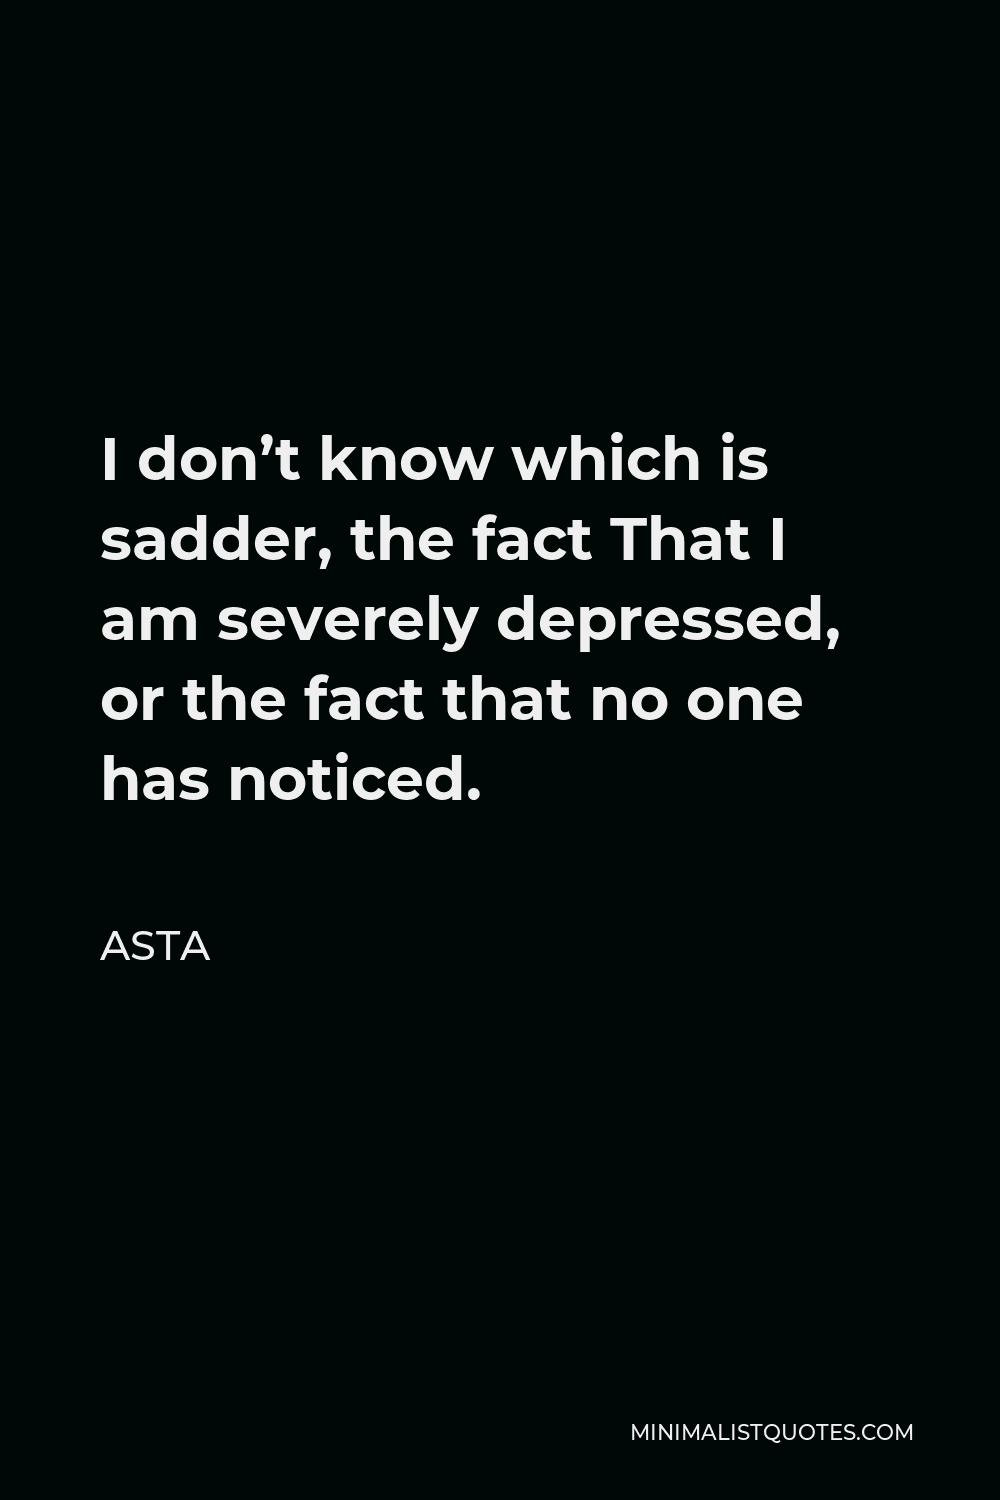 Asta Quote - I don’t know which is sadder, the fact That I am severely depressed, or the fact that no one has noticed.